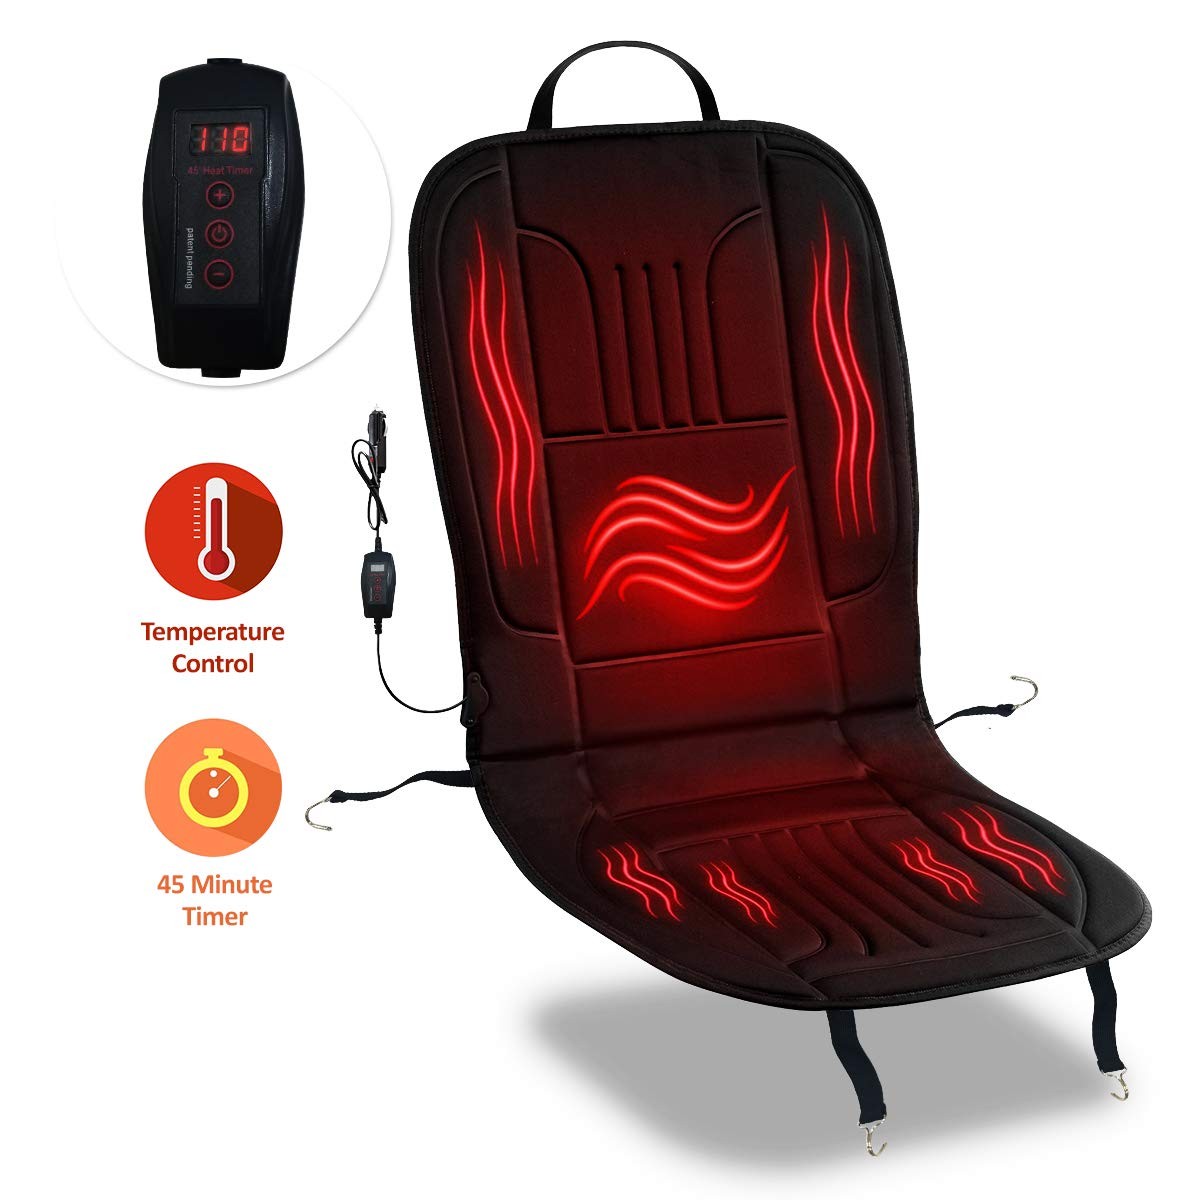 Zone Tech Car Heated Seat Cover Cushion Hot Warmer Fireproof NEW and IMPROVED 2019 Version 12V Heating Warmer Pad Cover Perfect for Cold Weather and Winter Driving Comfort Wheels SE0001 